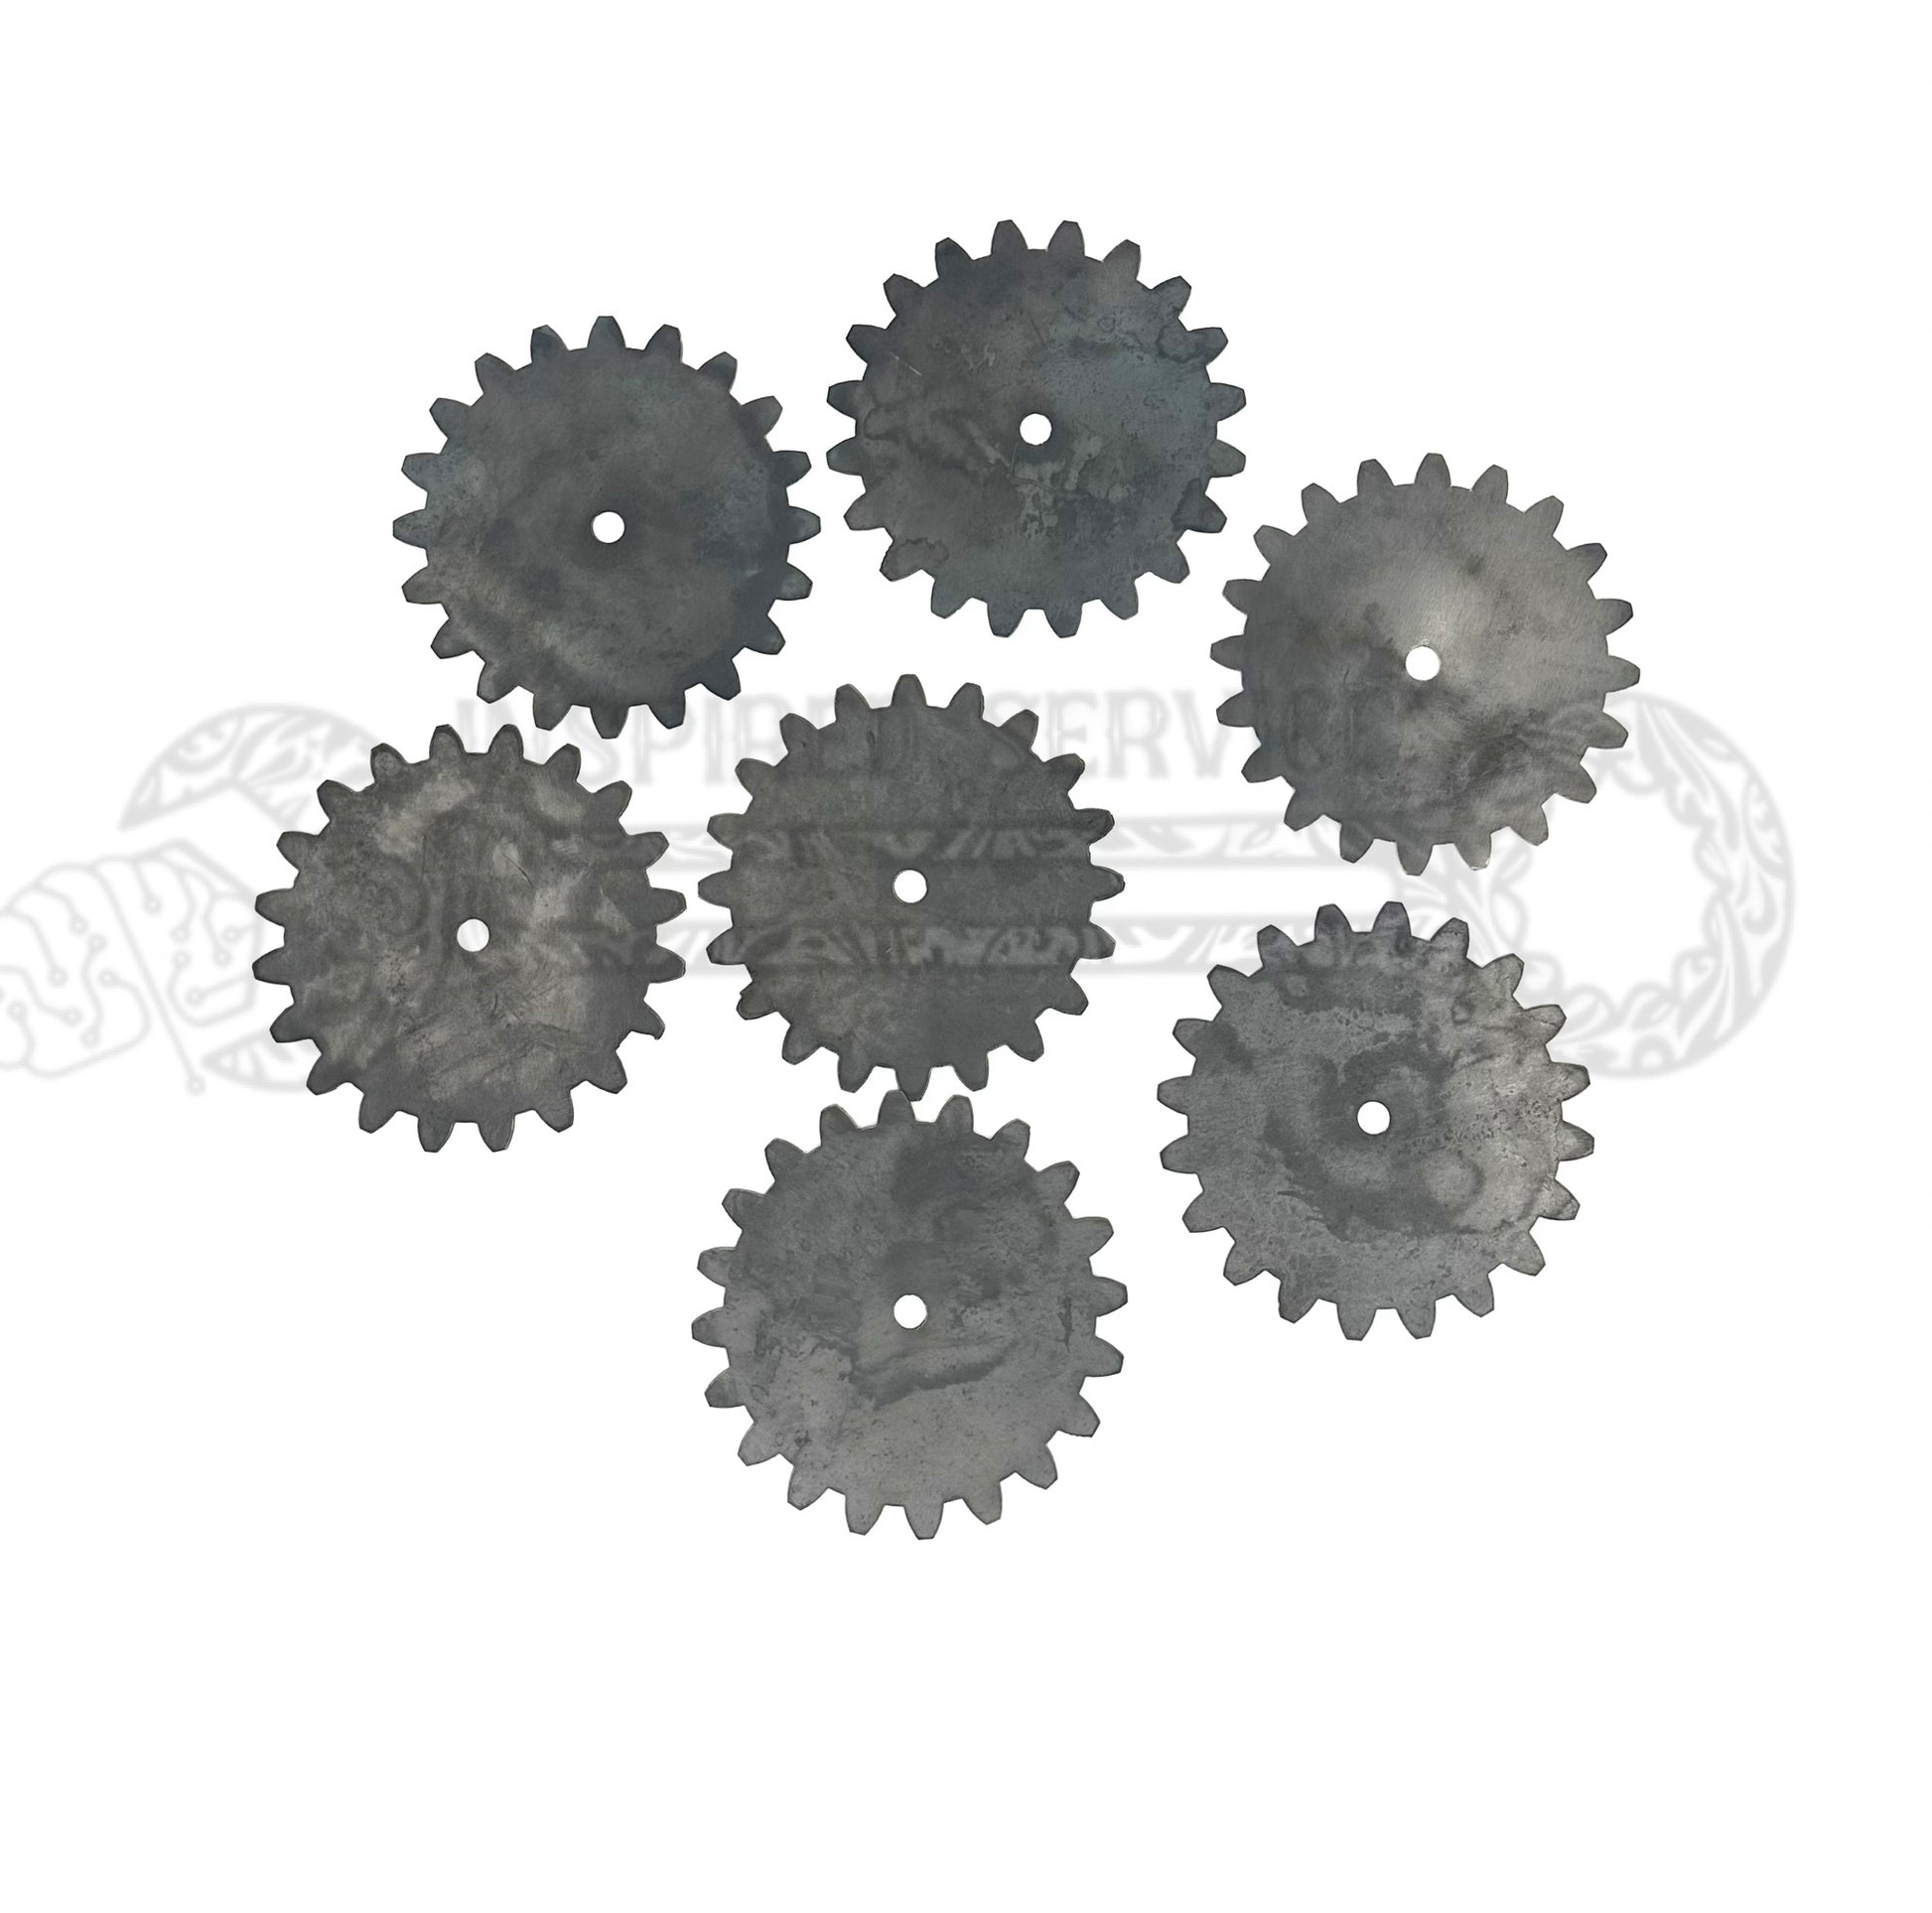 Decorative Steel Sign Gears pack of 10